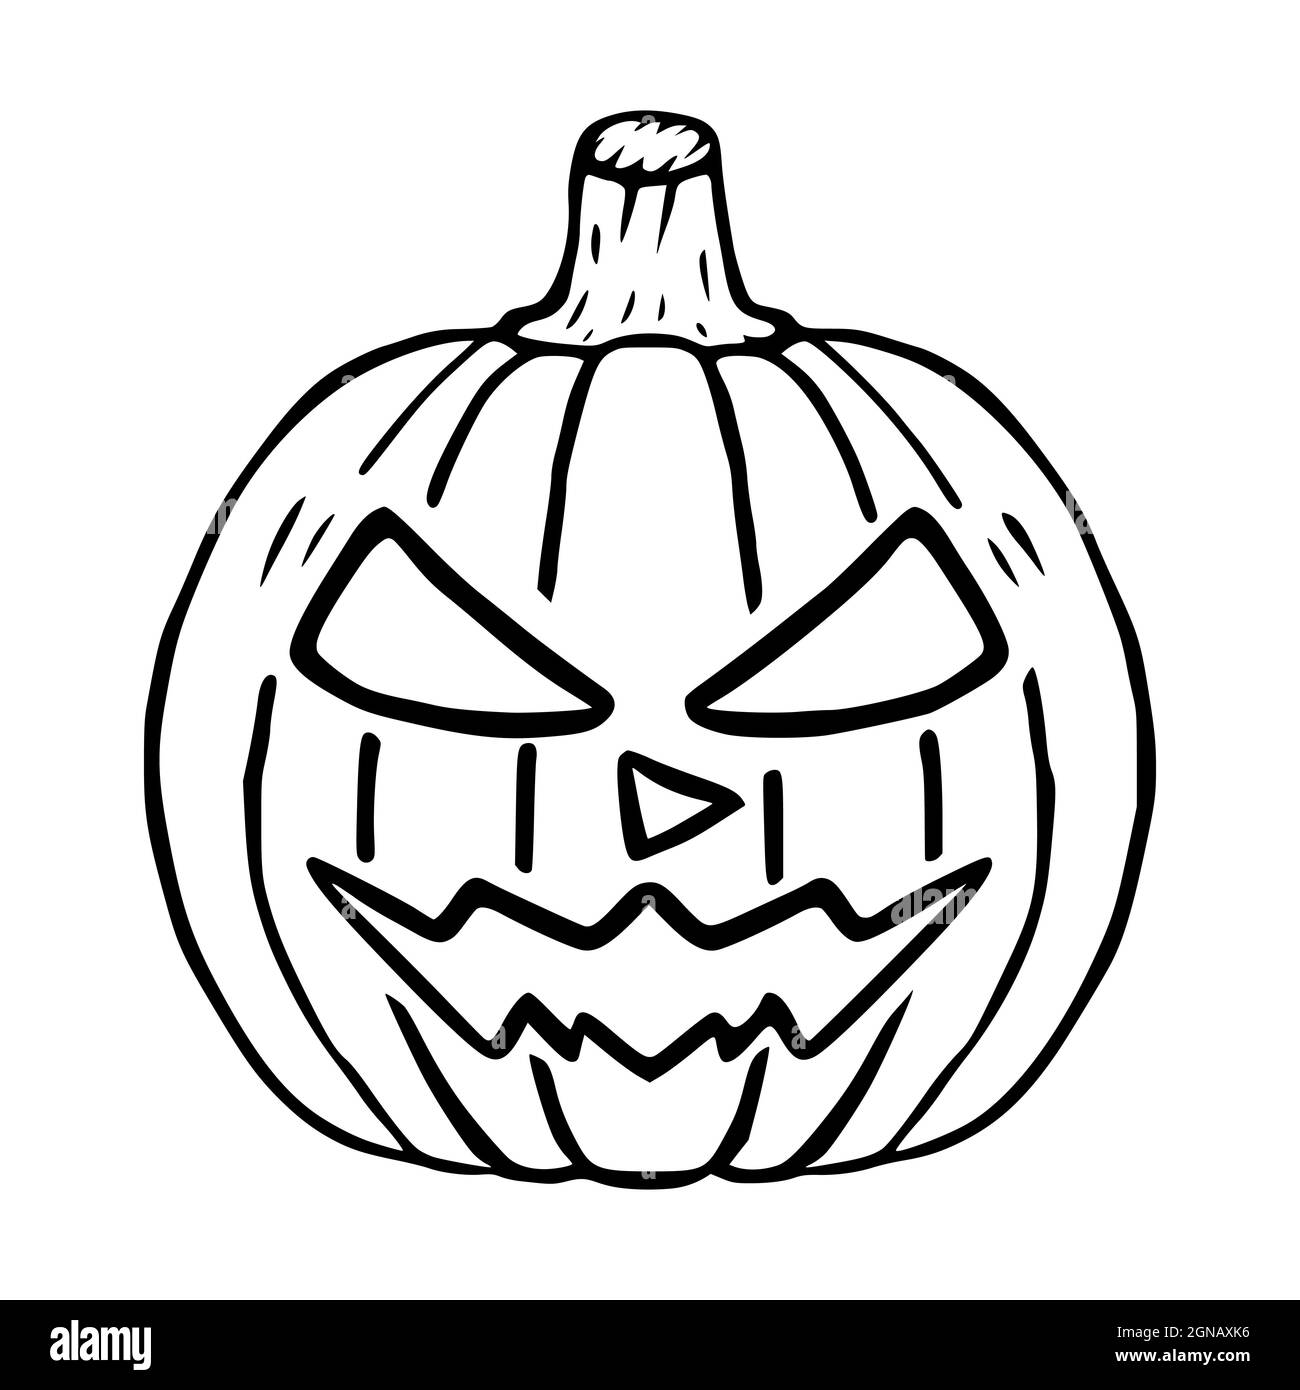 Collection of Halloween monsters doodle drawing such as Jack o